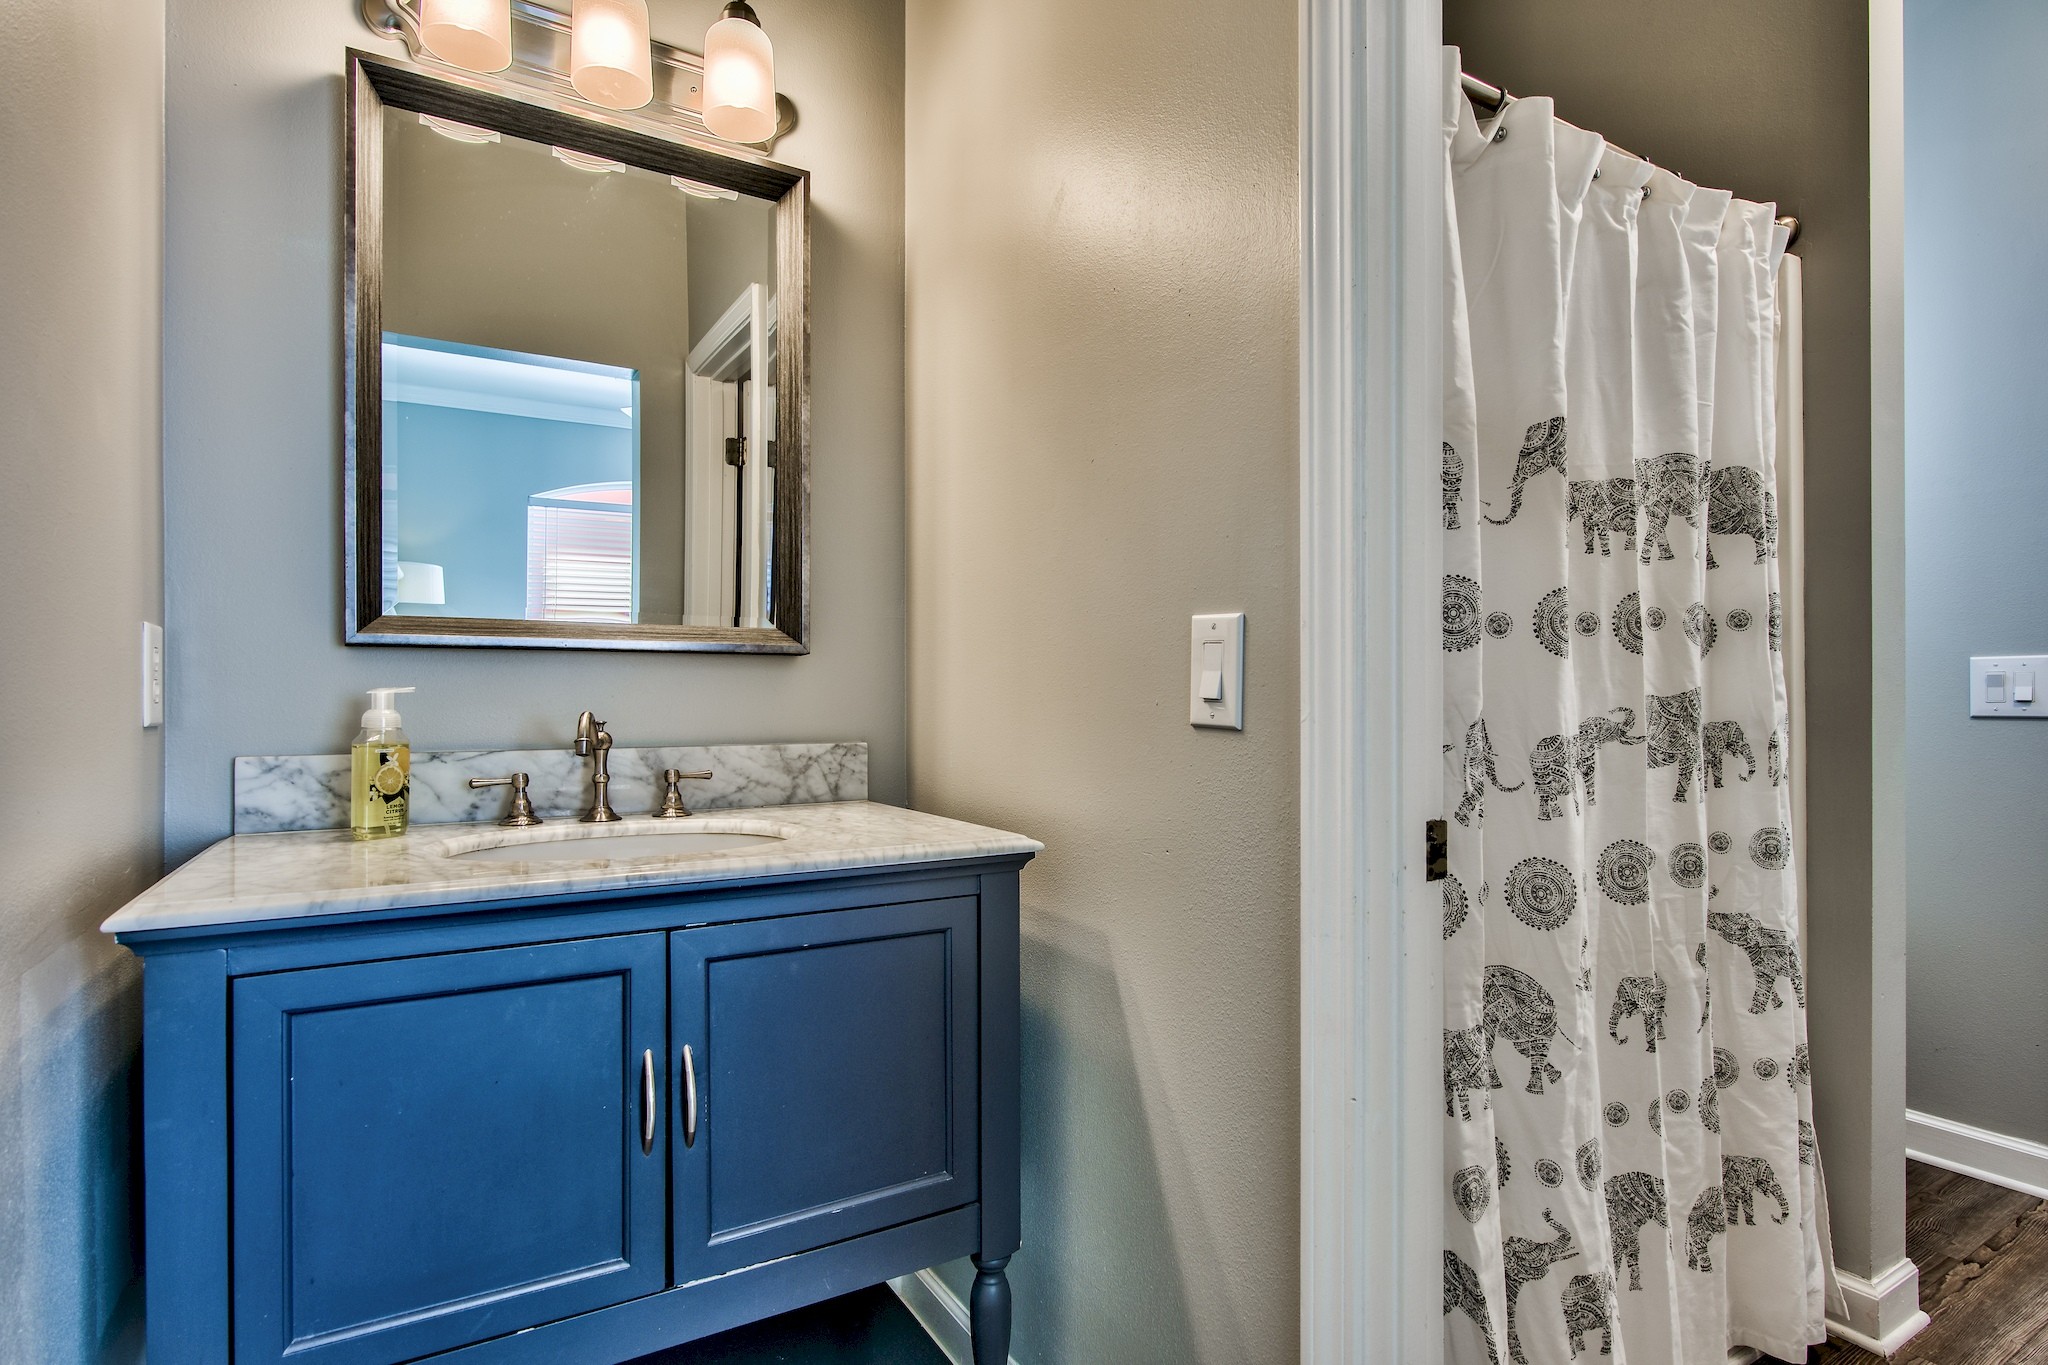 Jack and Jill Bathroom with walk-in shower